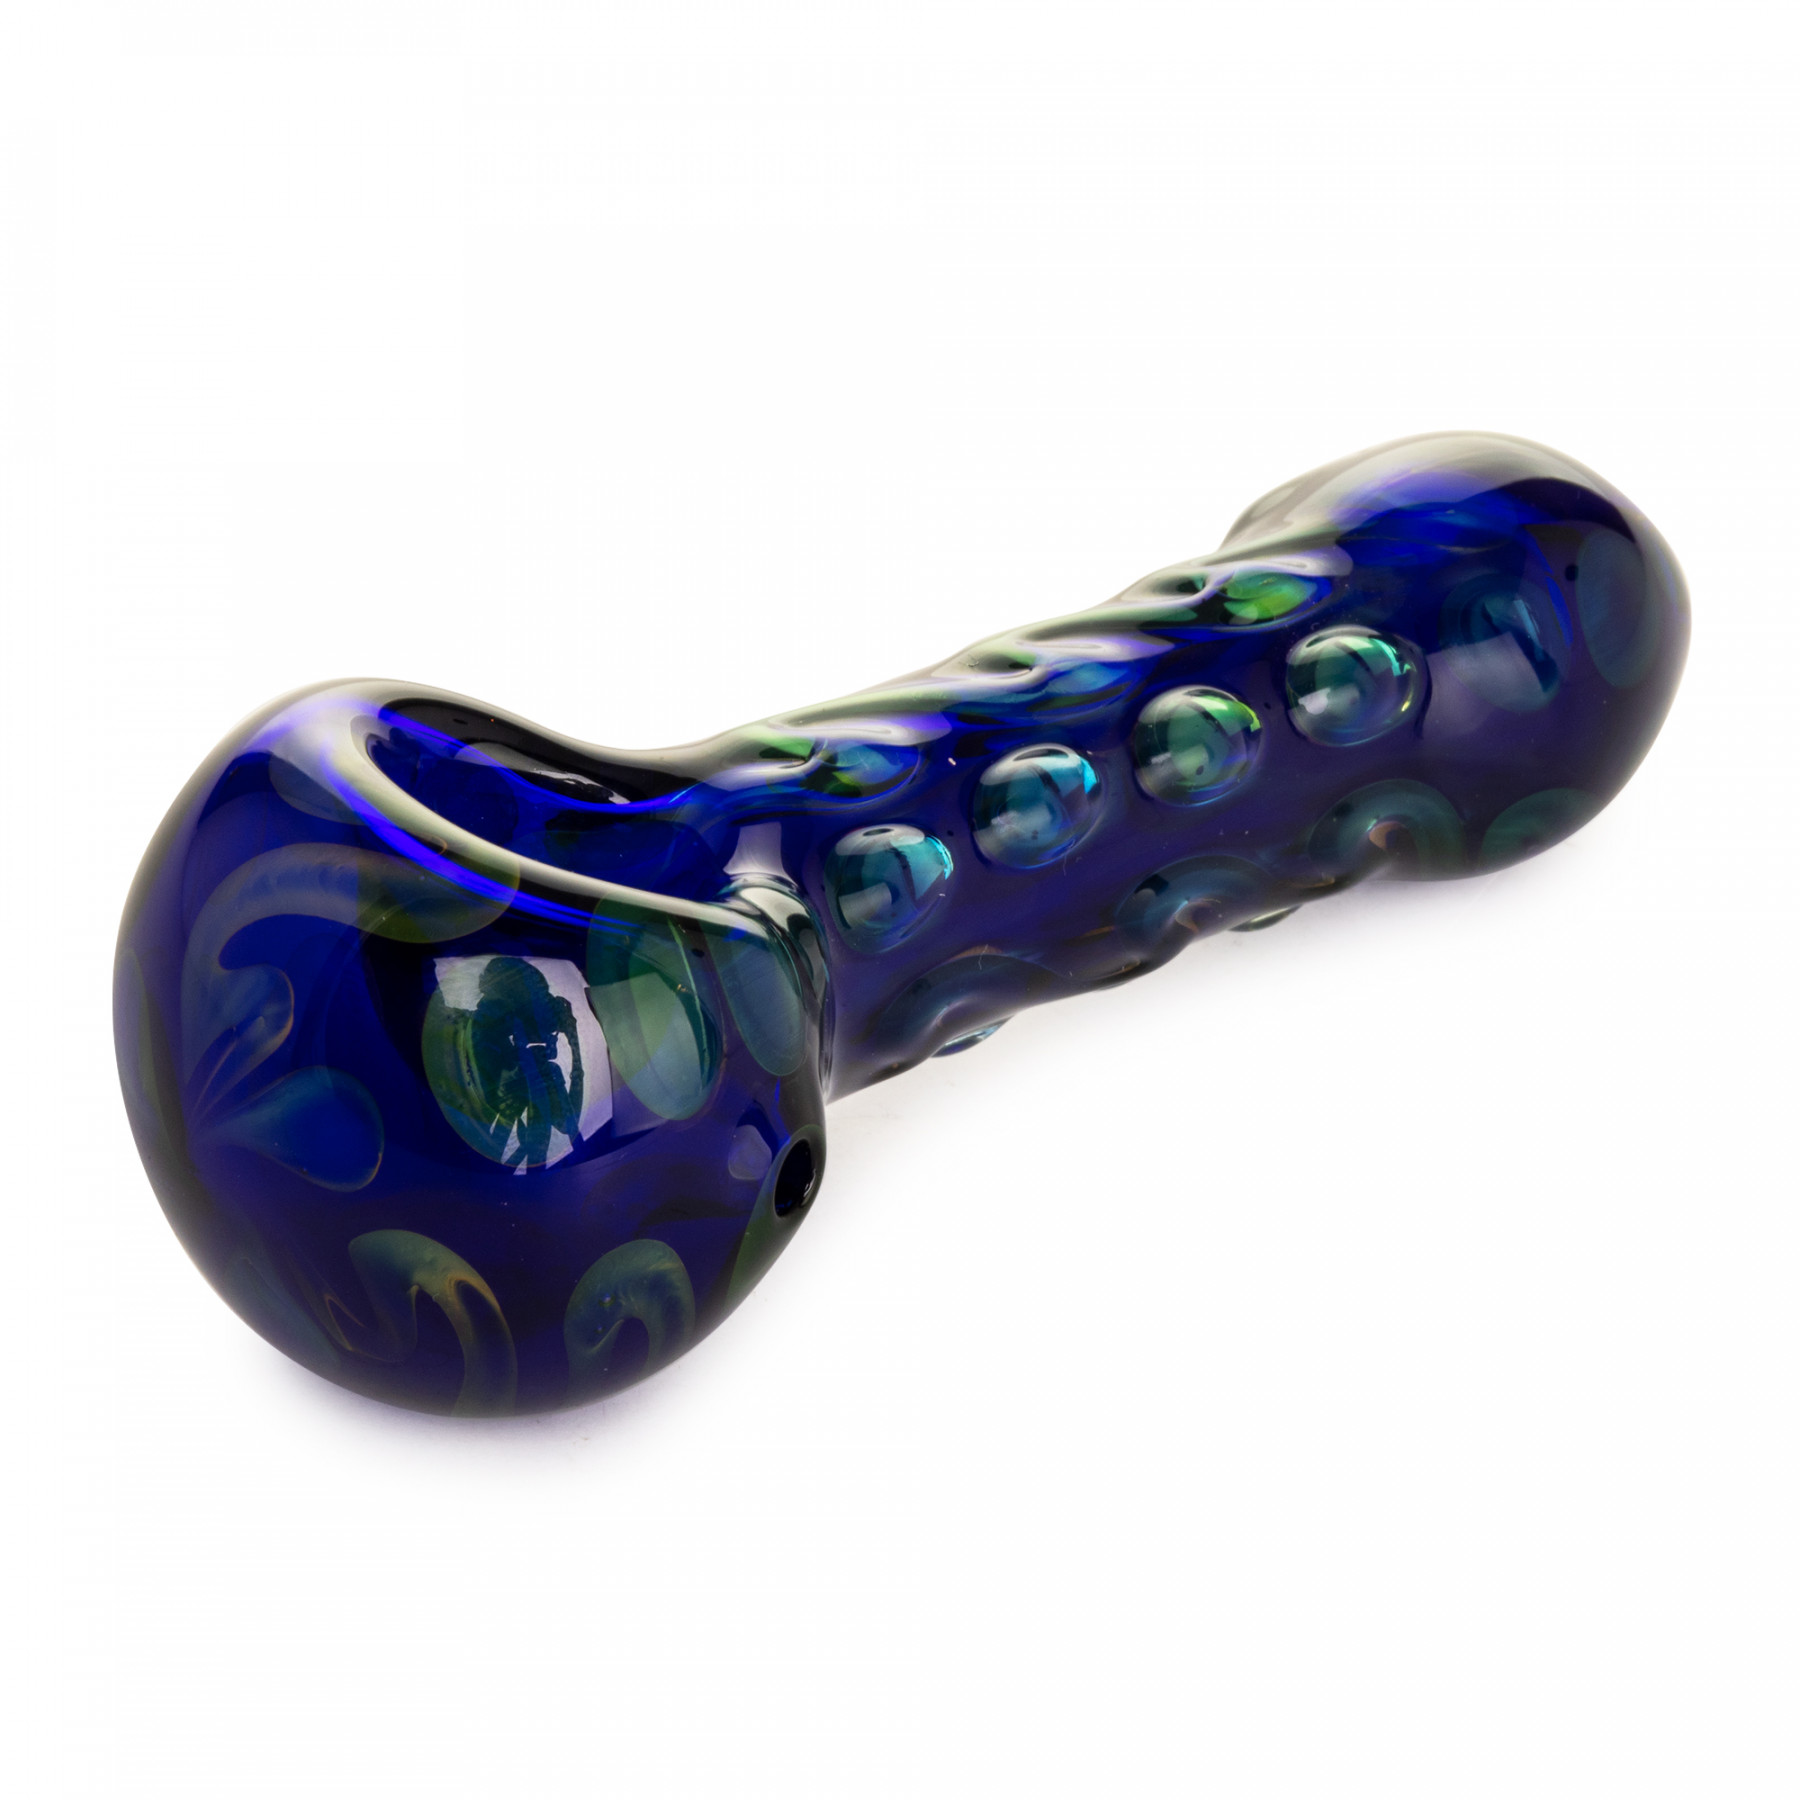 4.5" E's Special Spoon Hand Pipe